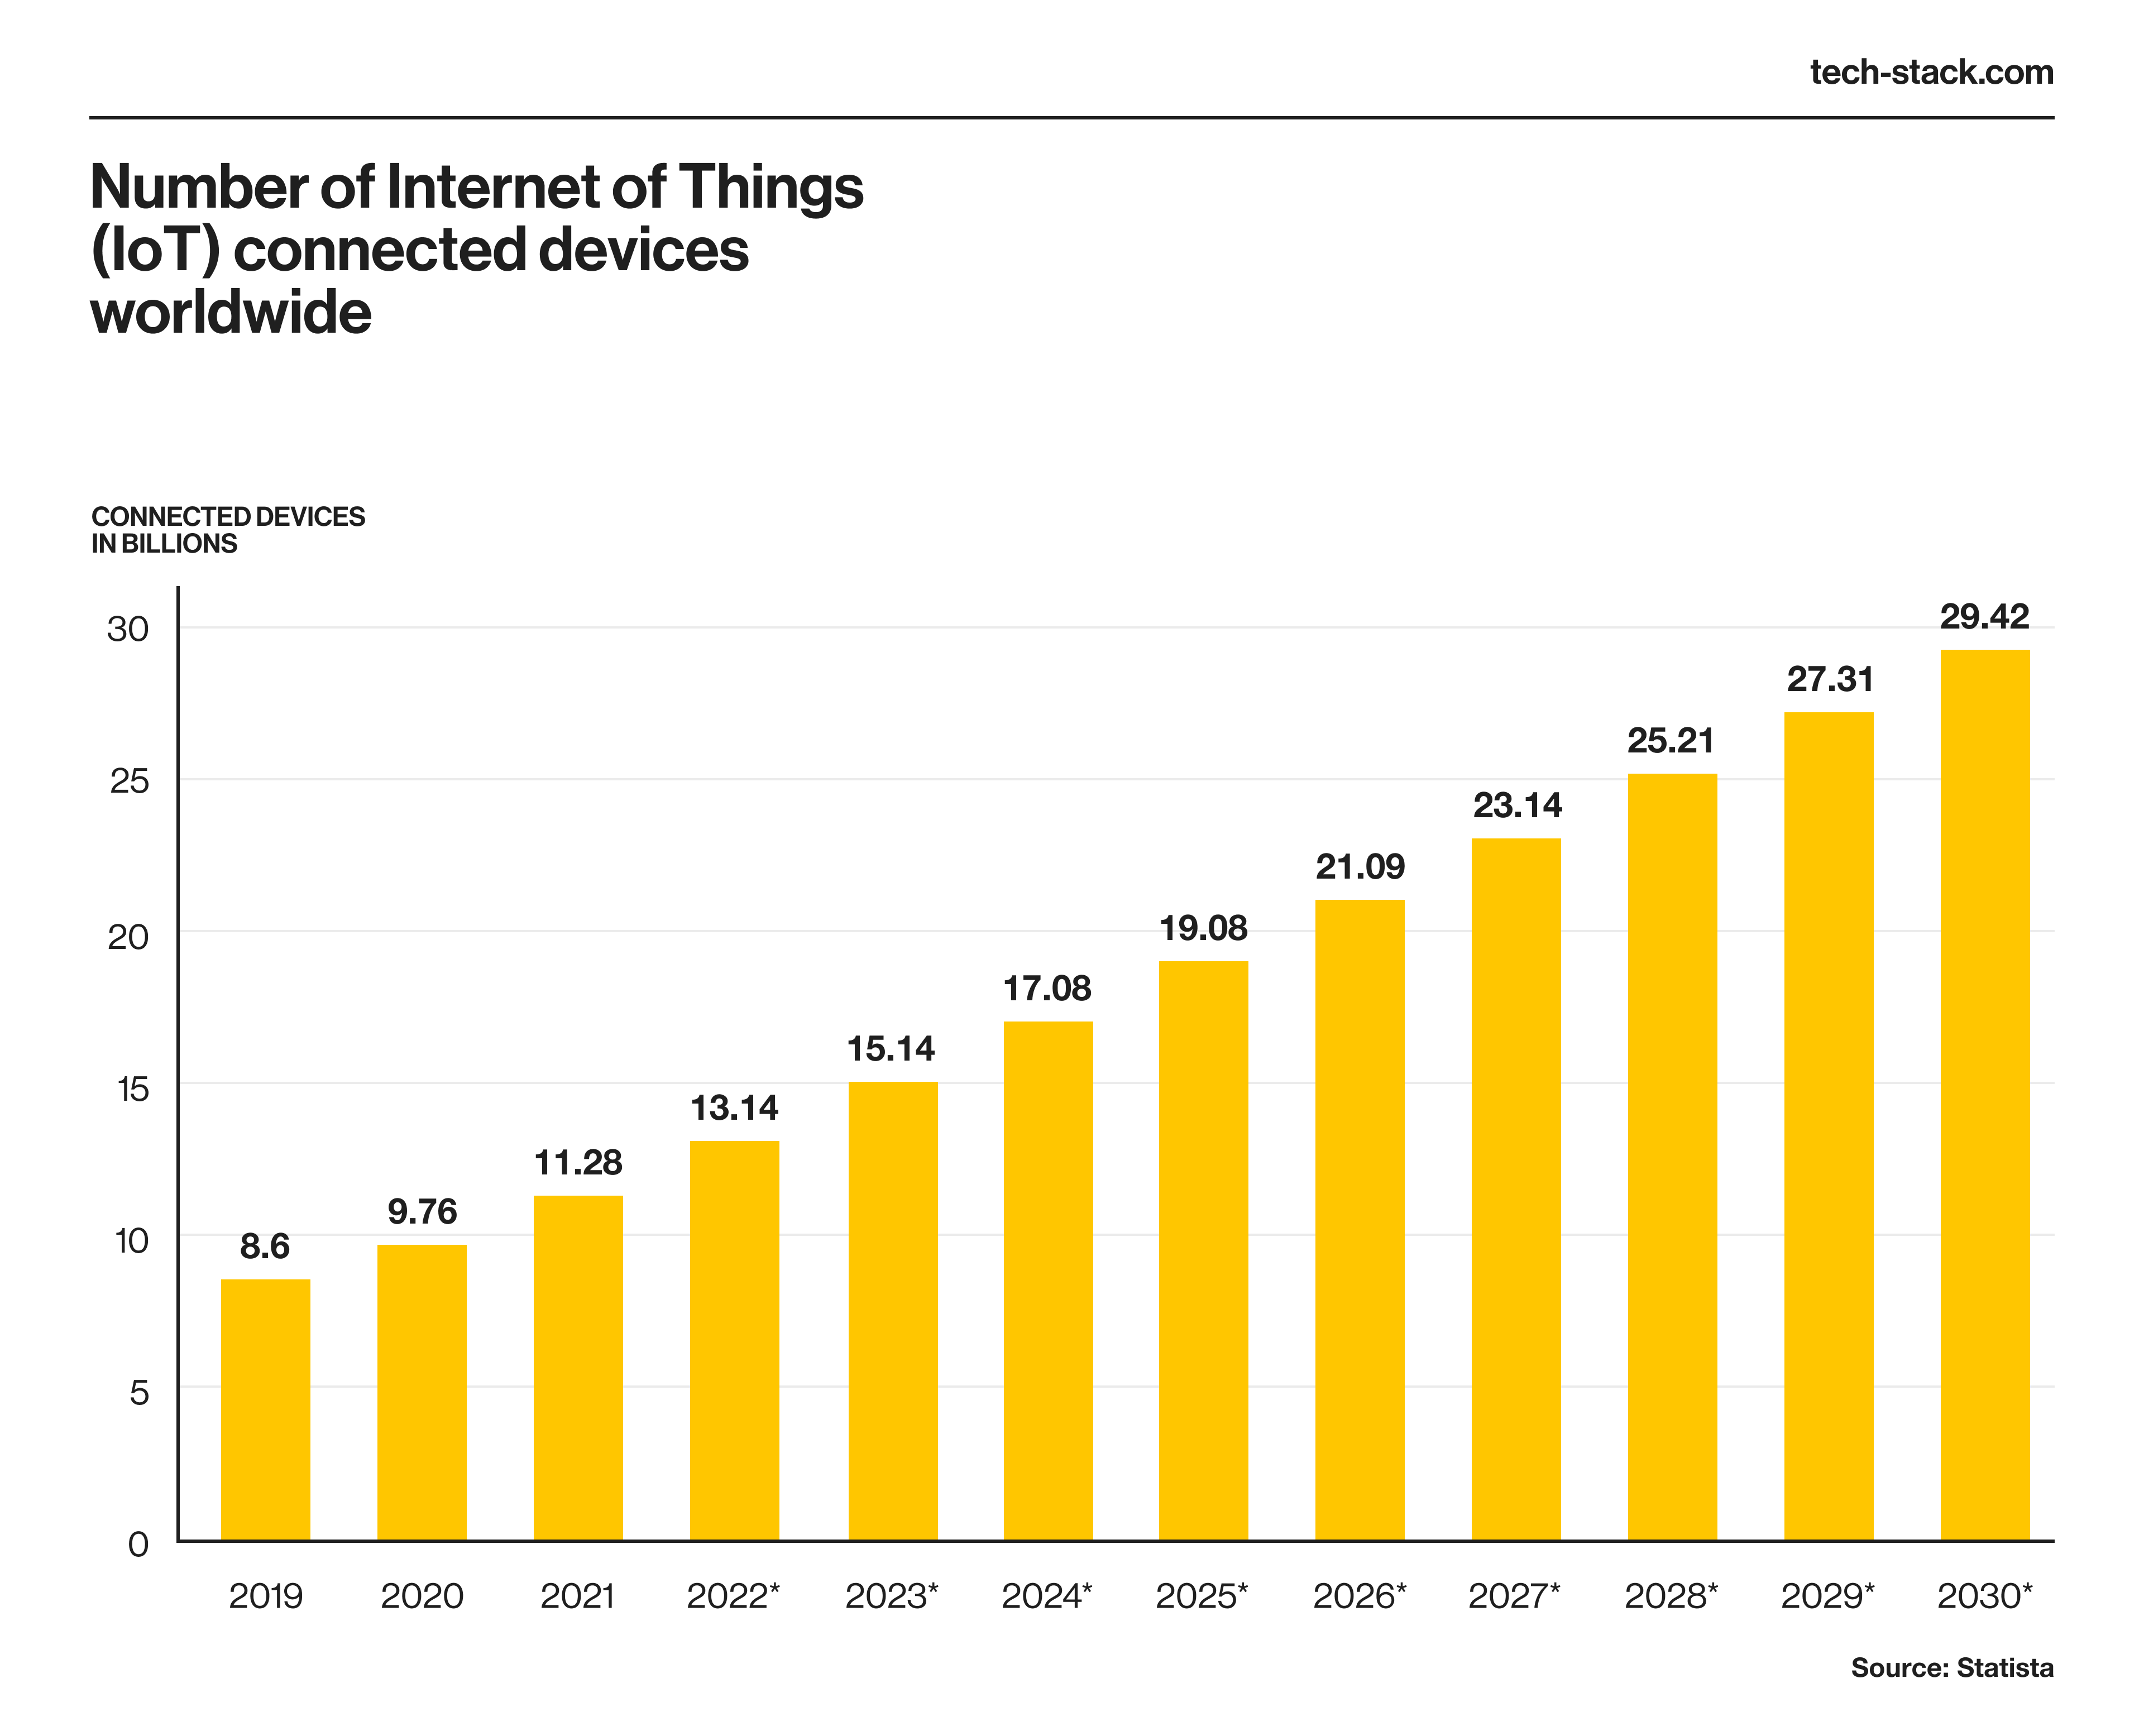 Number of IoT-connected devices worldwide